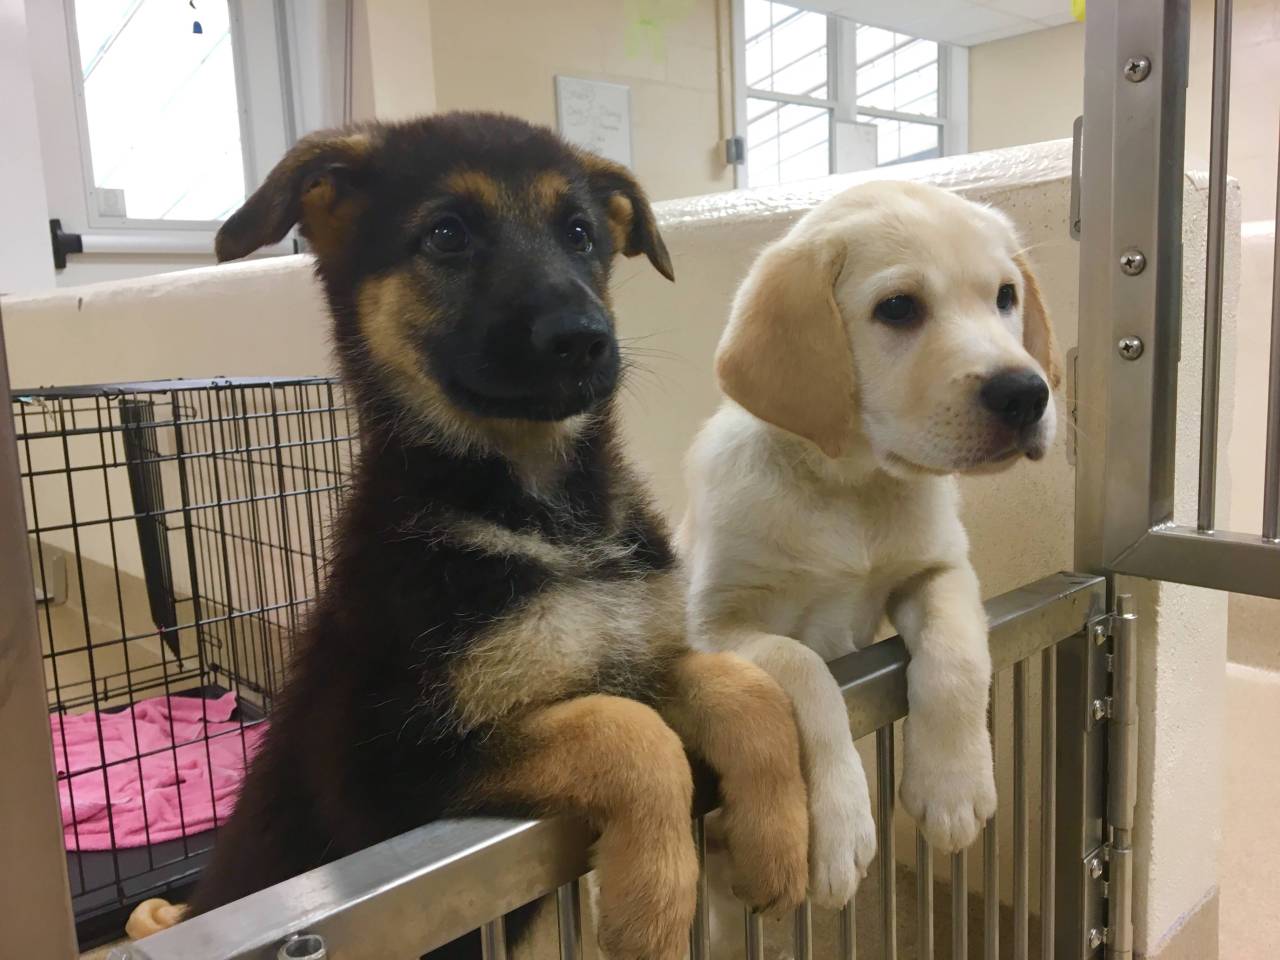 Got to hang with these two future guide dogs yesterday (Source: http://ift.tt/2cvHTQY)